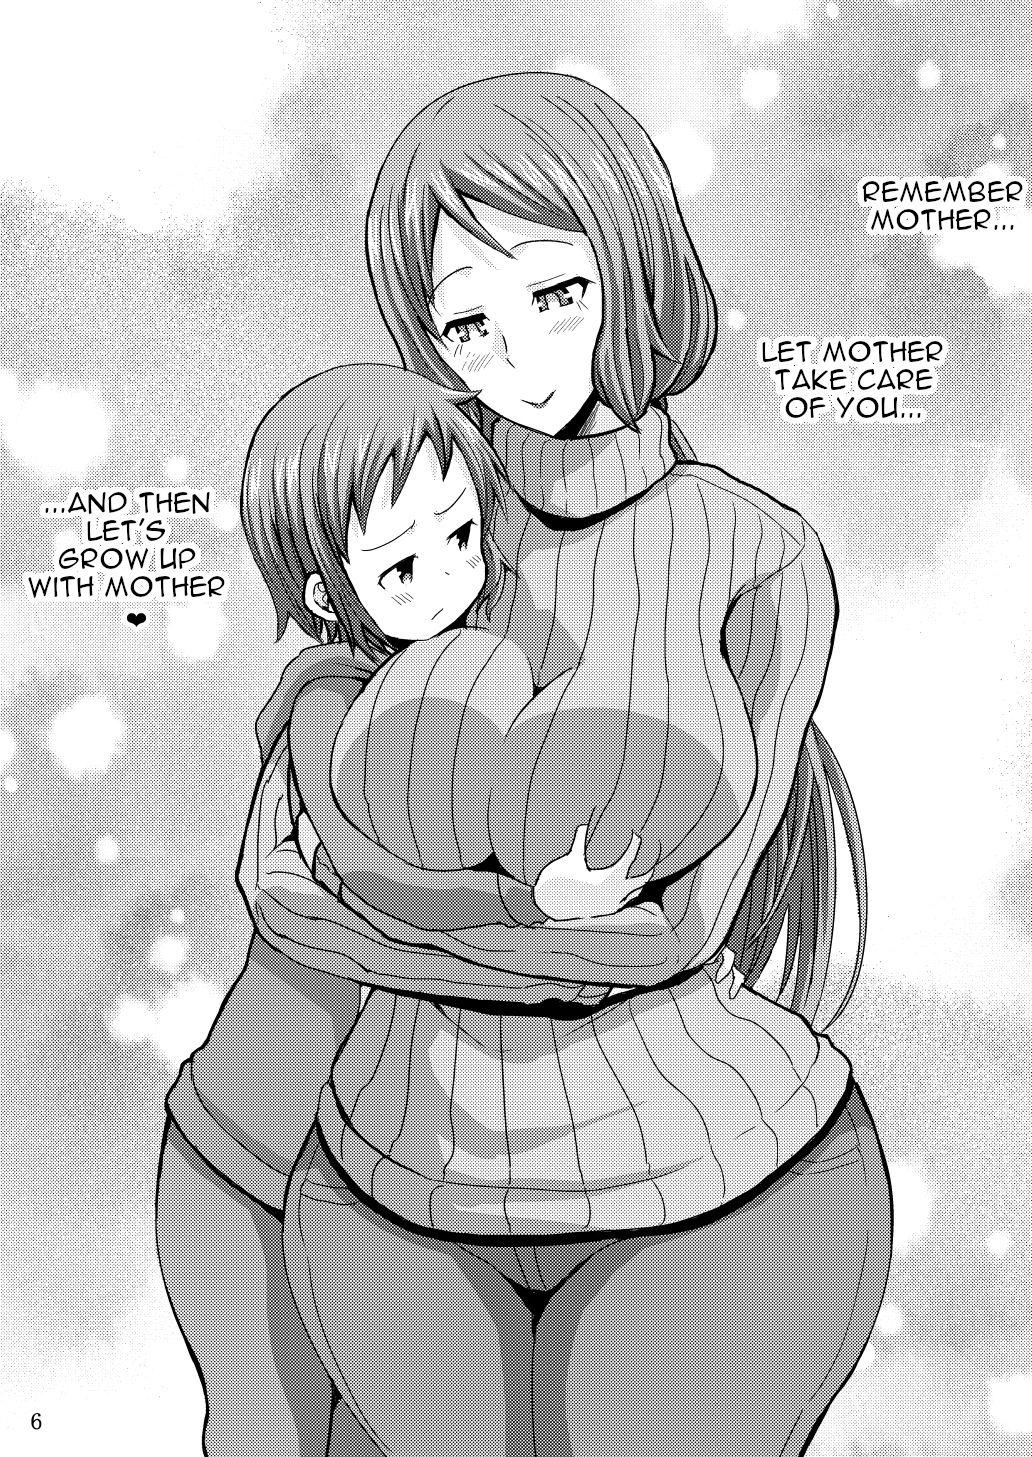 Stroking Okaa-san to Hagukumimasho | Let's grow up with mother - Gundam build fighters Gay Youngmen - Page 5